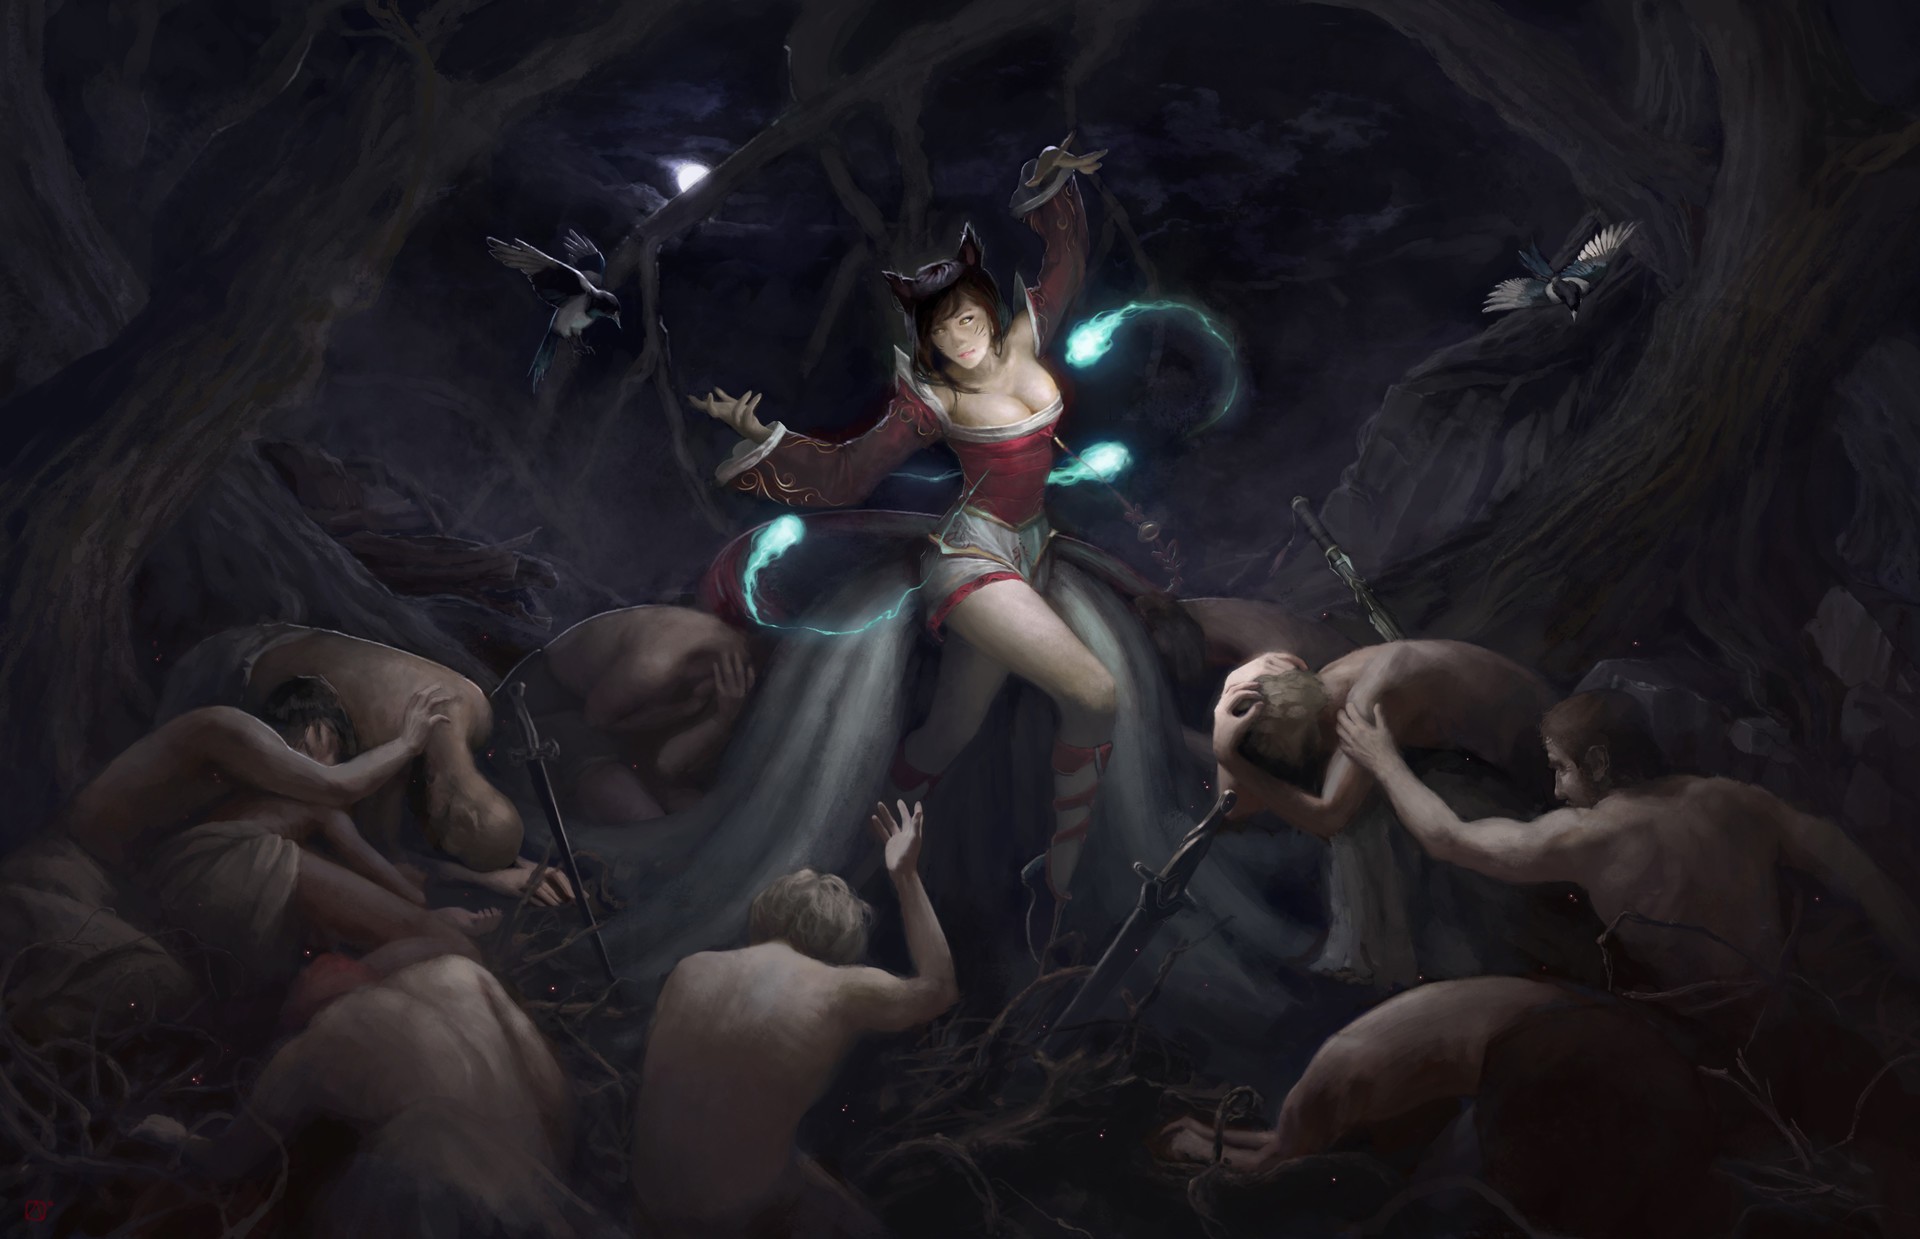 General 1920x1239 League of Legends Ahri (League of Legends) fantasy girl PC gaming video game art DeviantArt video game girls fantasy art boobs dark hair cleavage women men